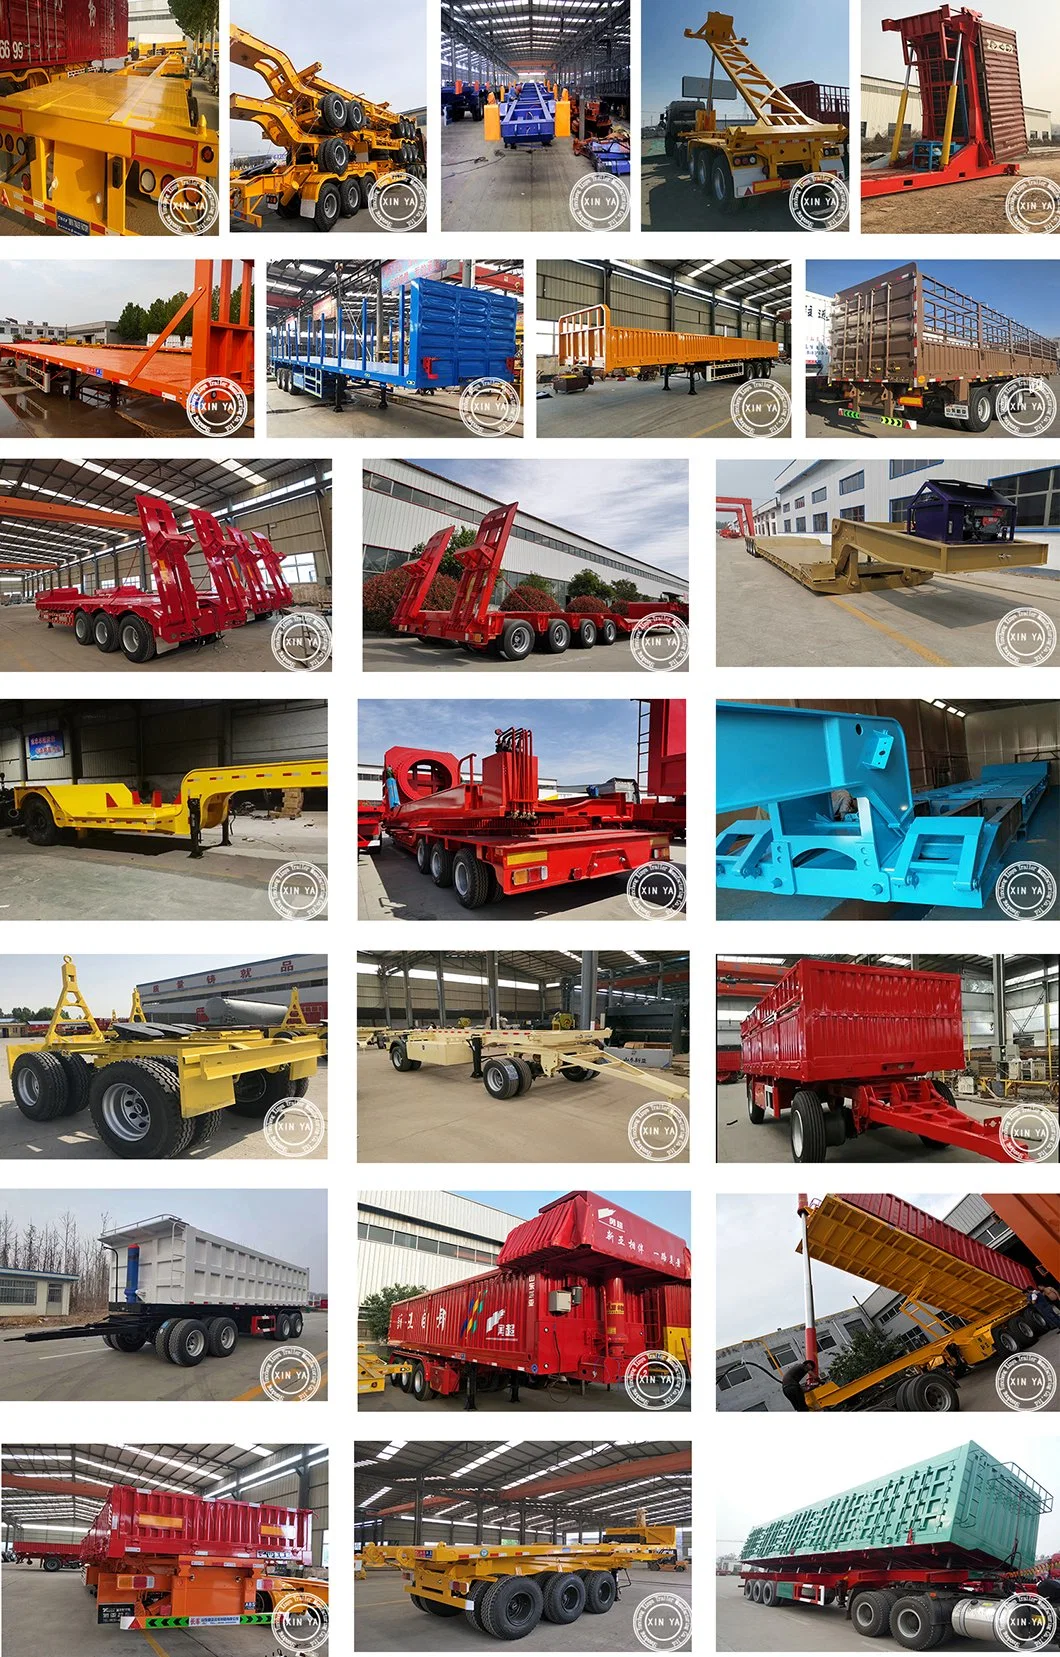 Wholesale Box Loader 60tons OEM SKD Terminal Skeletal with Traction Seat 60FT Carrying Crane Excavator/Tractor with Ladder Flatbed Trailer